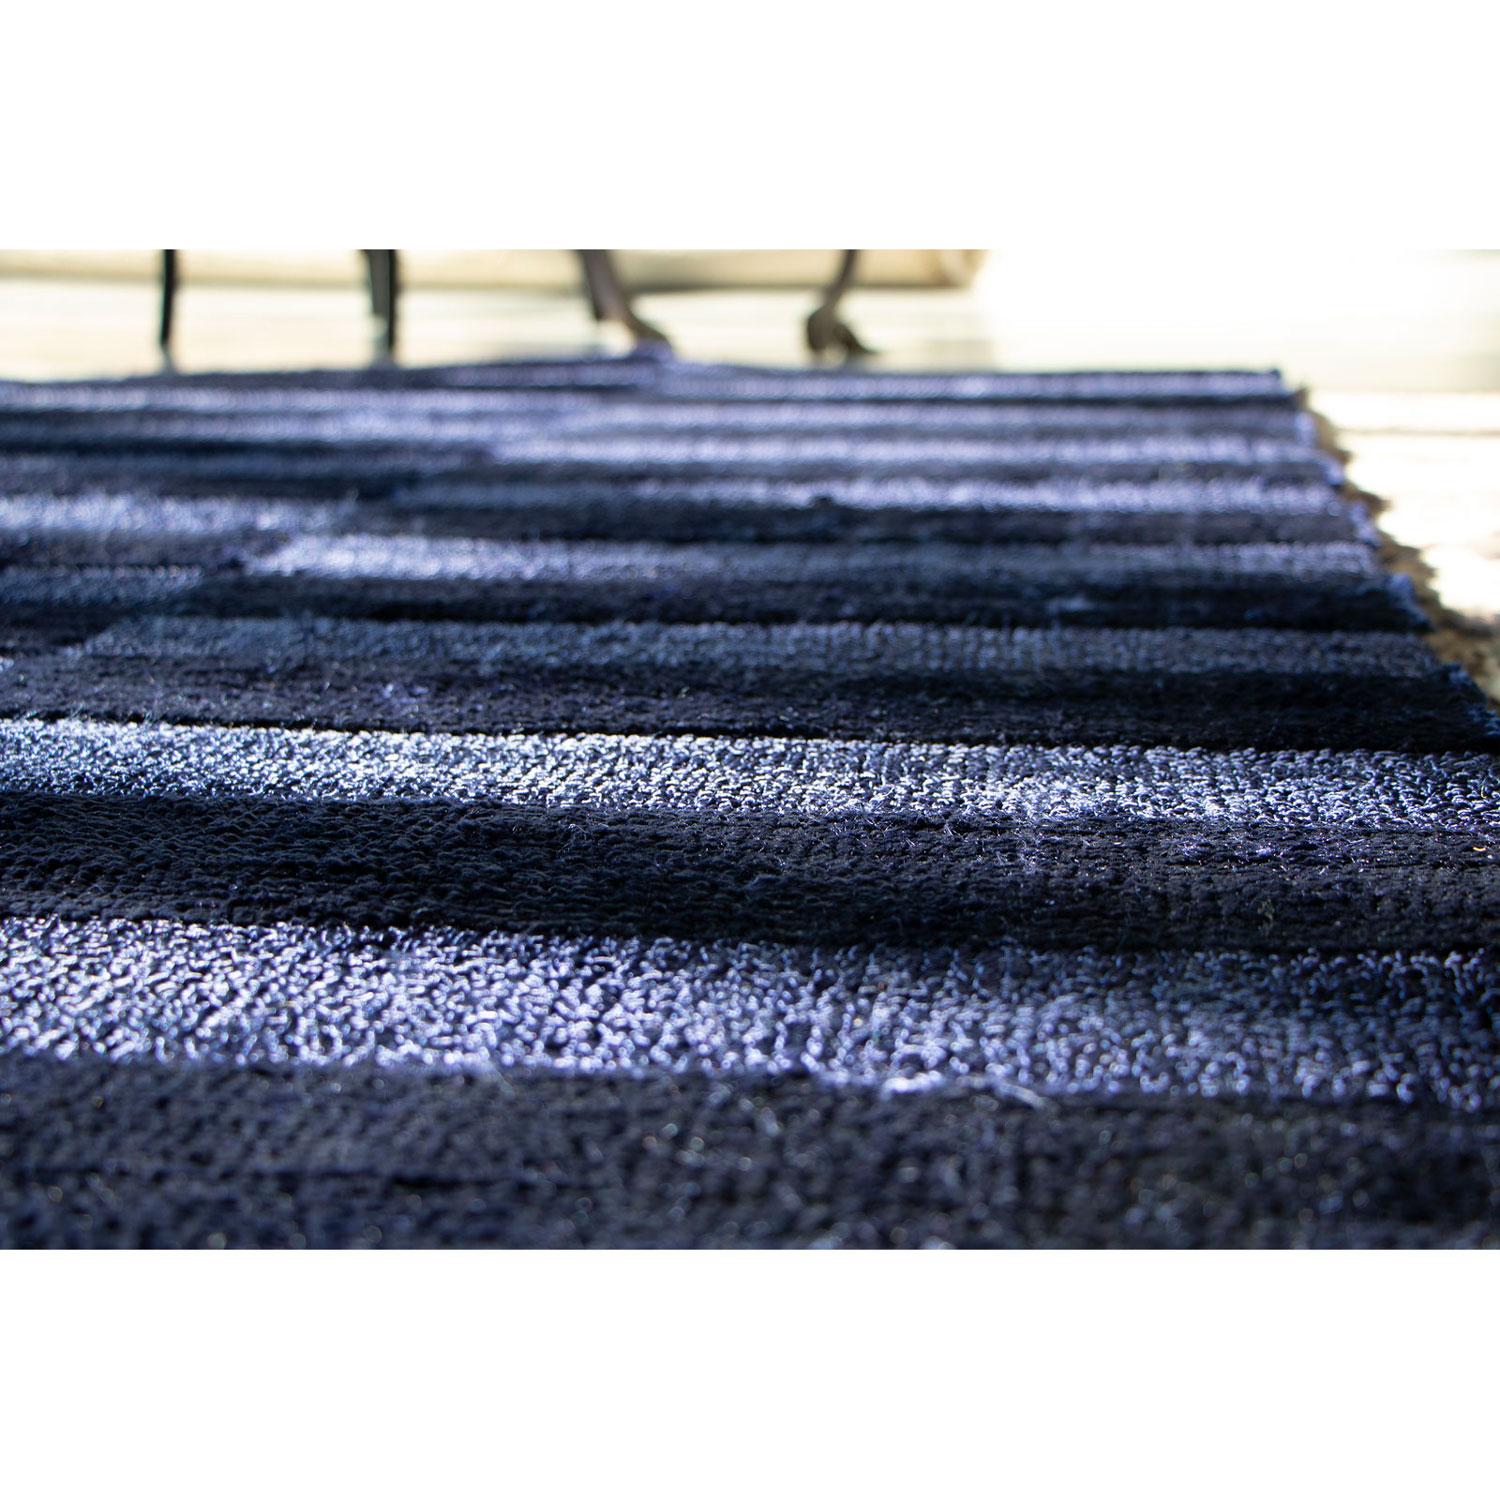 Indian Contemporary Striped Luxury Shiny Velvety Blue Rug by Deanna Comellini 150x300cm For Sale